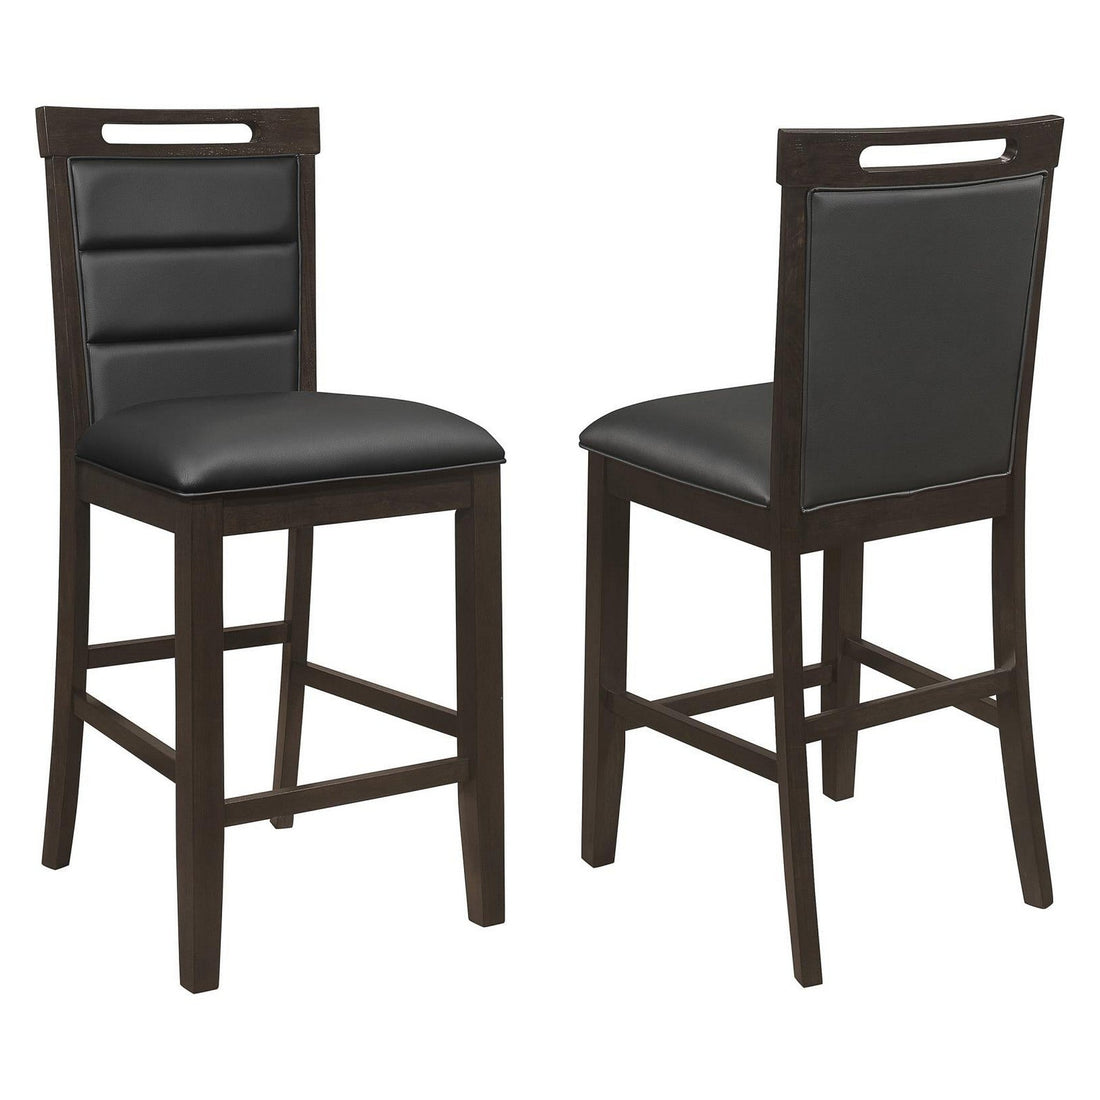 Prentiss Upholstered Counter Height Chair (Set of 2) Black and Cappuccino 193109